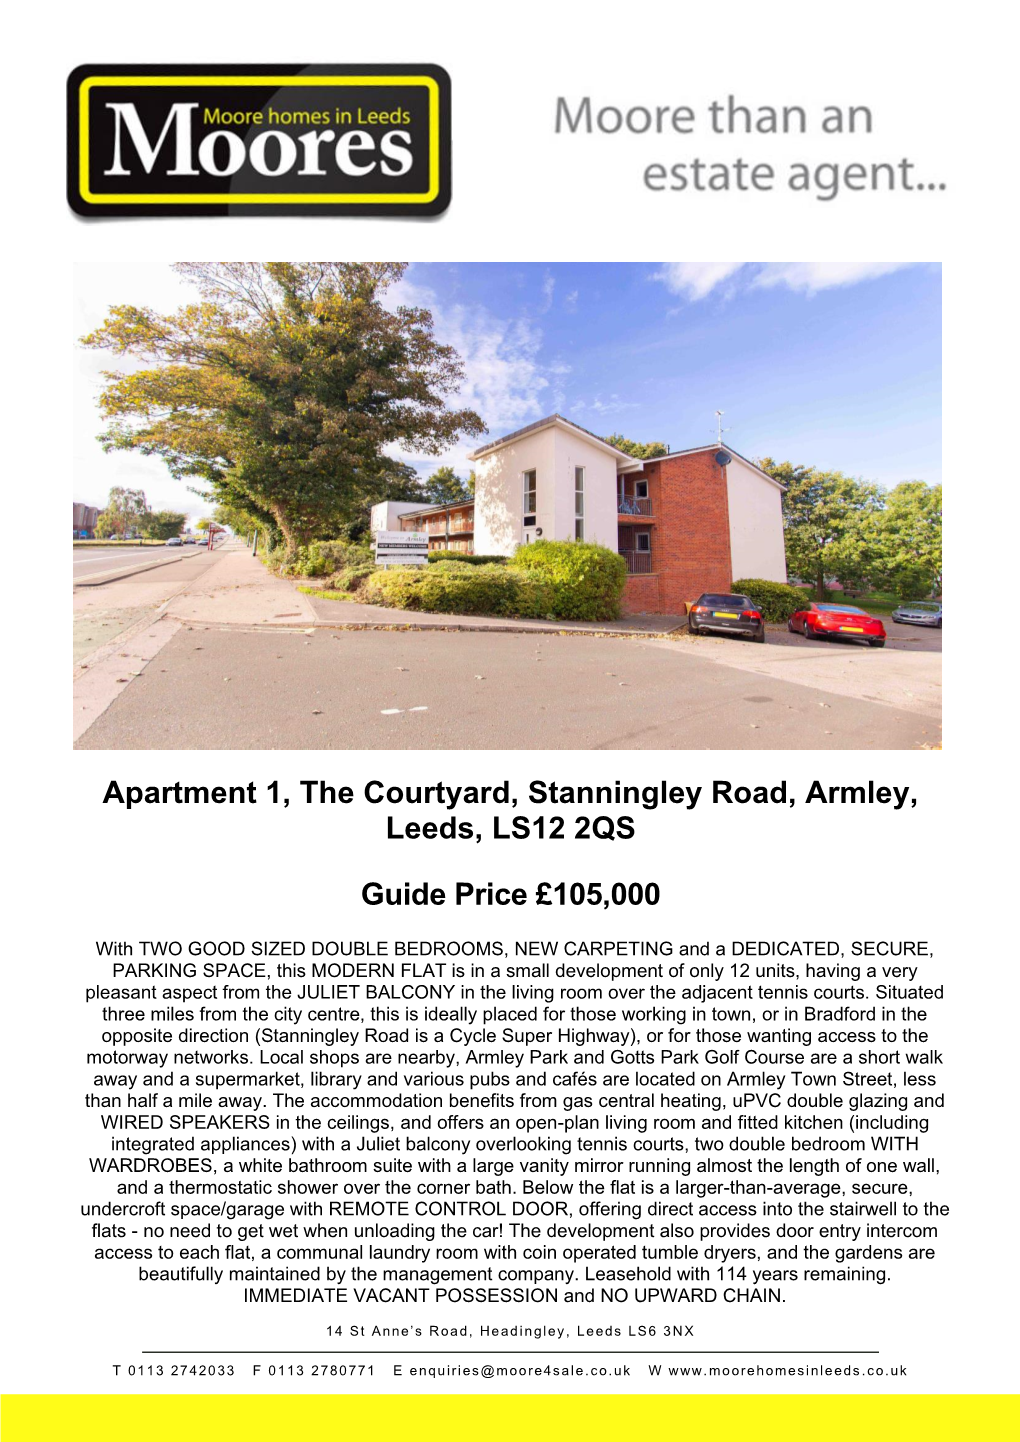 Apartment 1, the Courtyard, Stanningley Road, Armley, Leeds, LS12 2QS